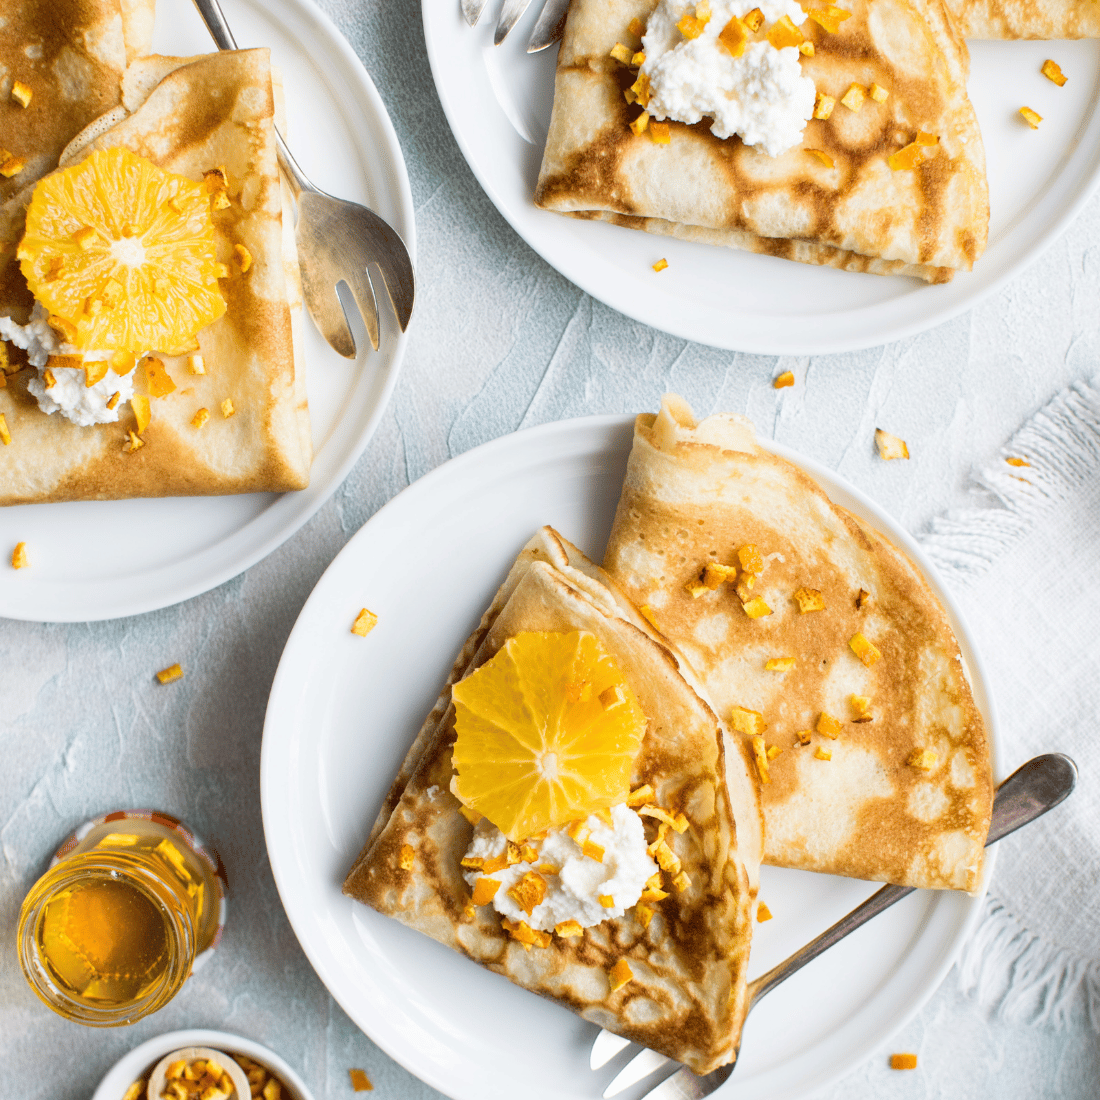 Crêpes with Sugar & Flavored Olive Oil